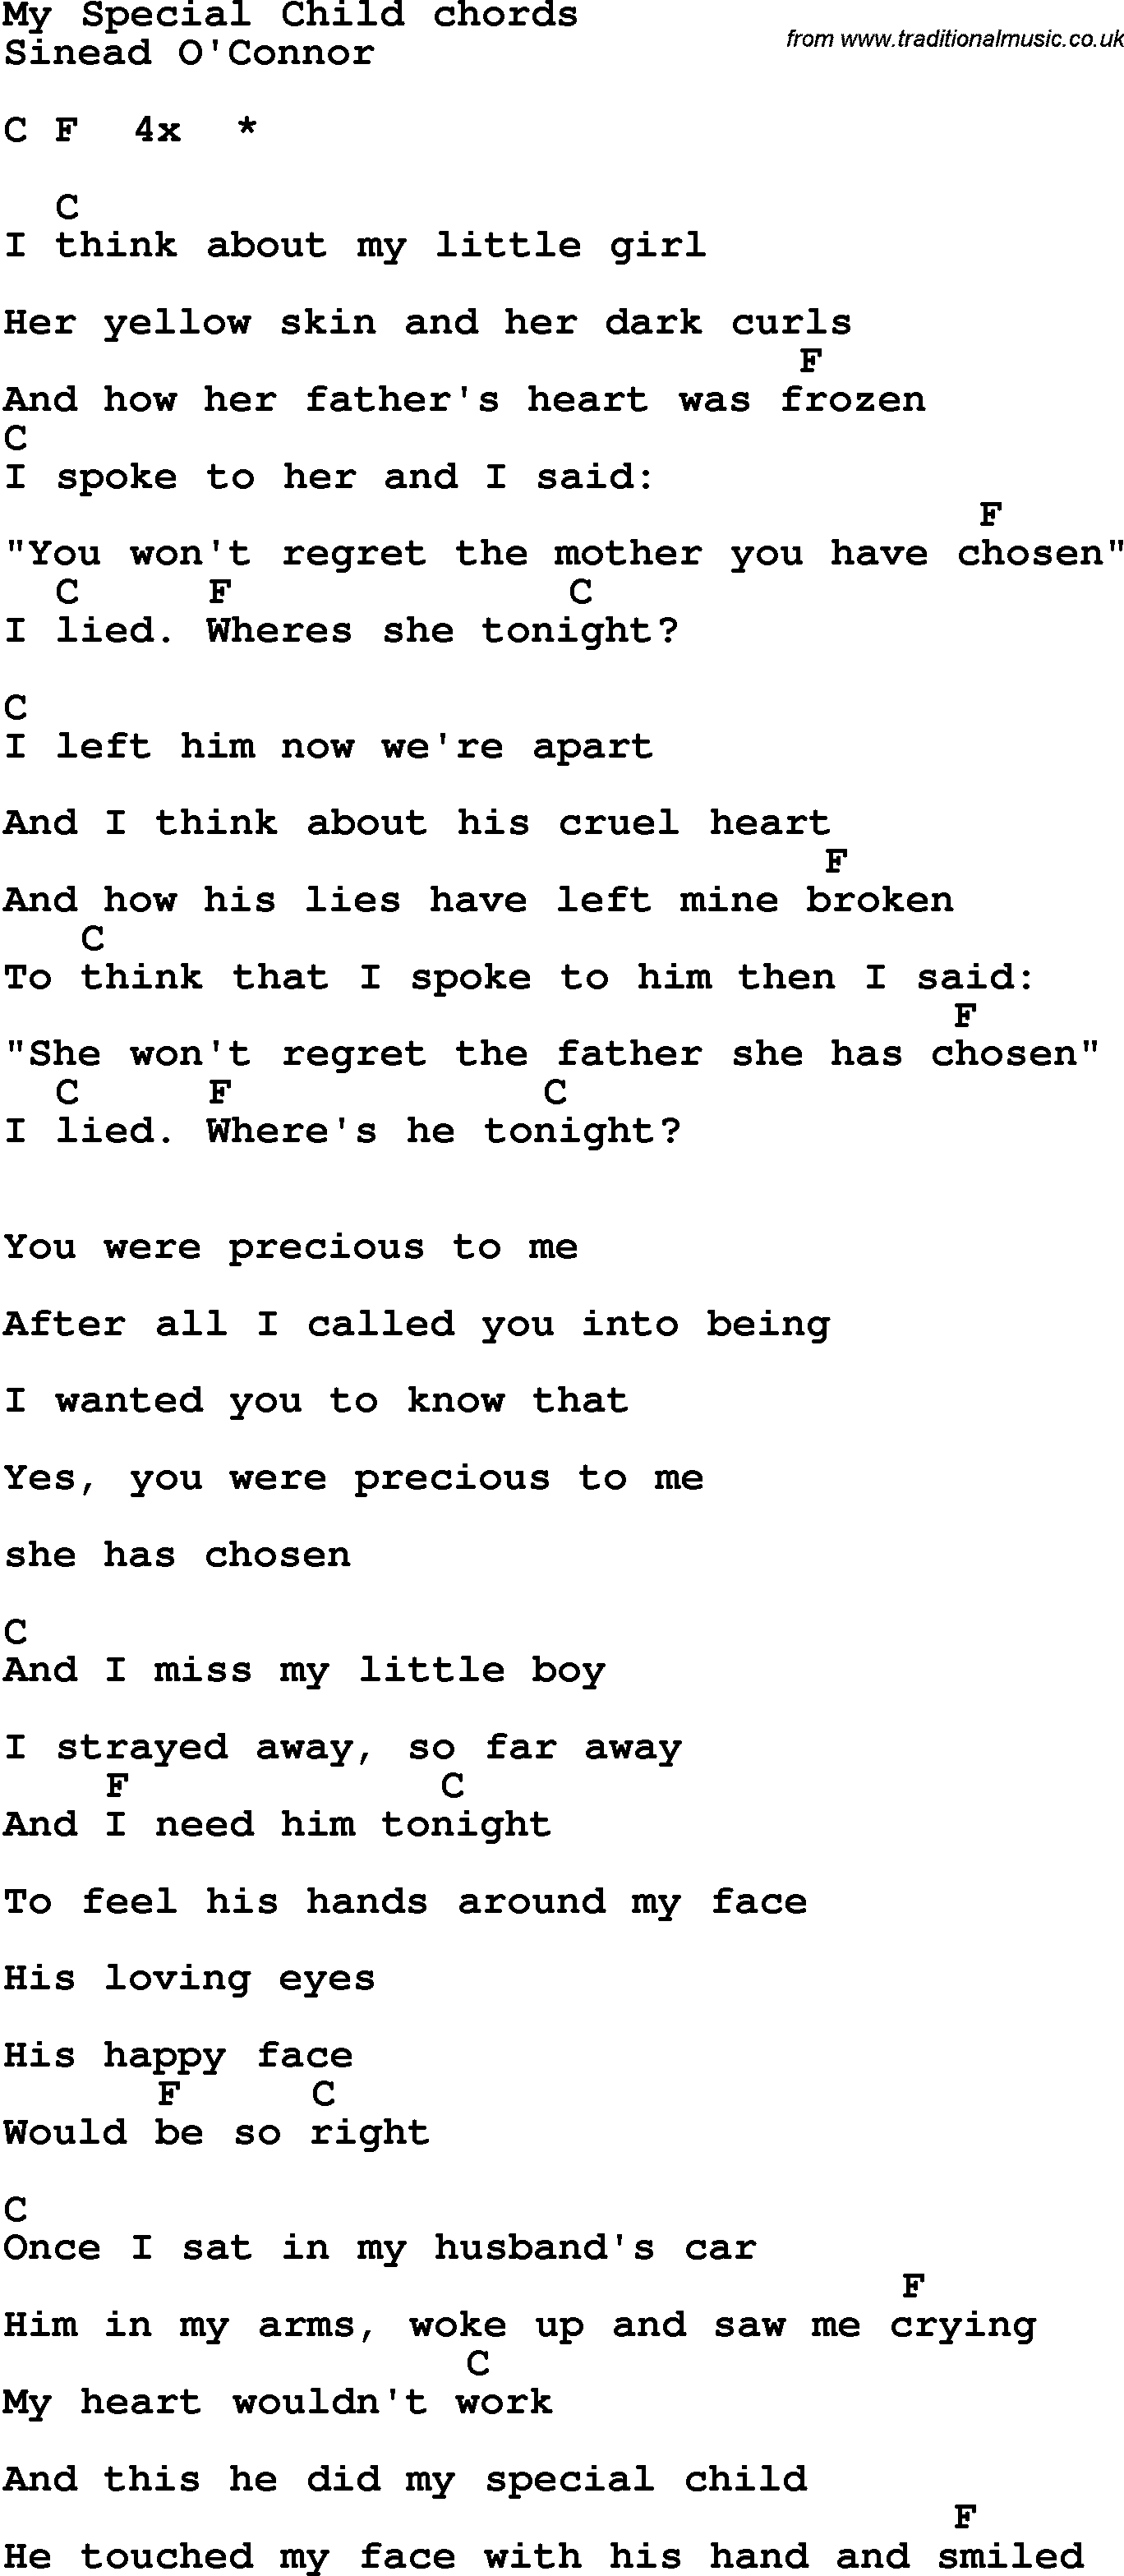 Song Lyrics with guitar chords for My Special Child